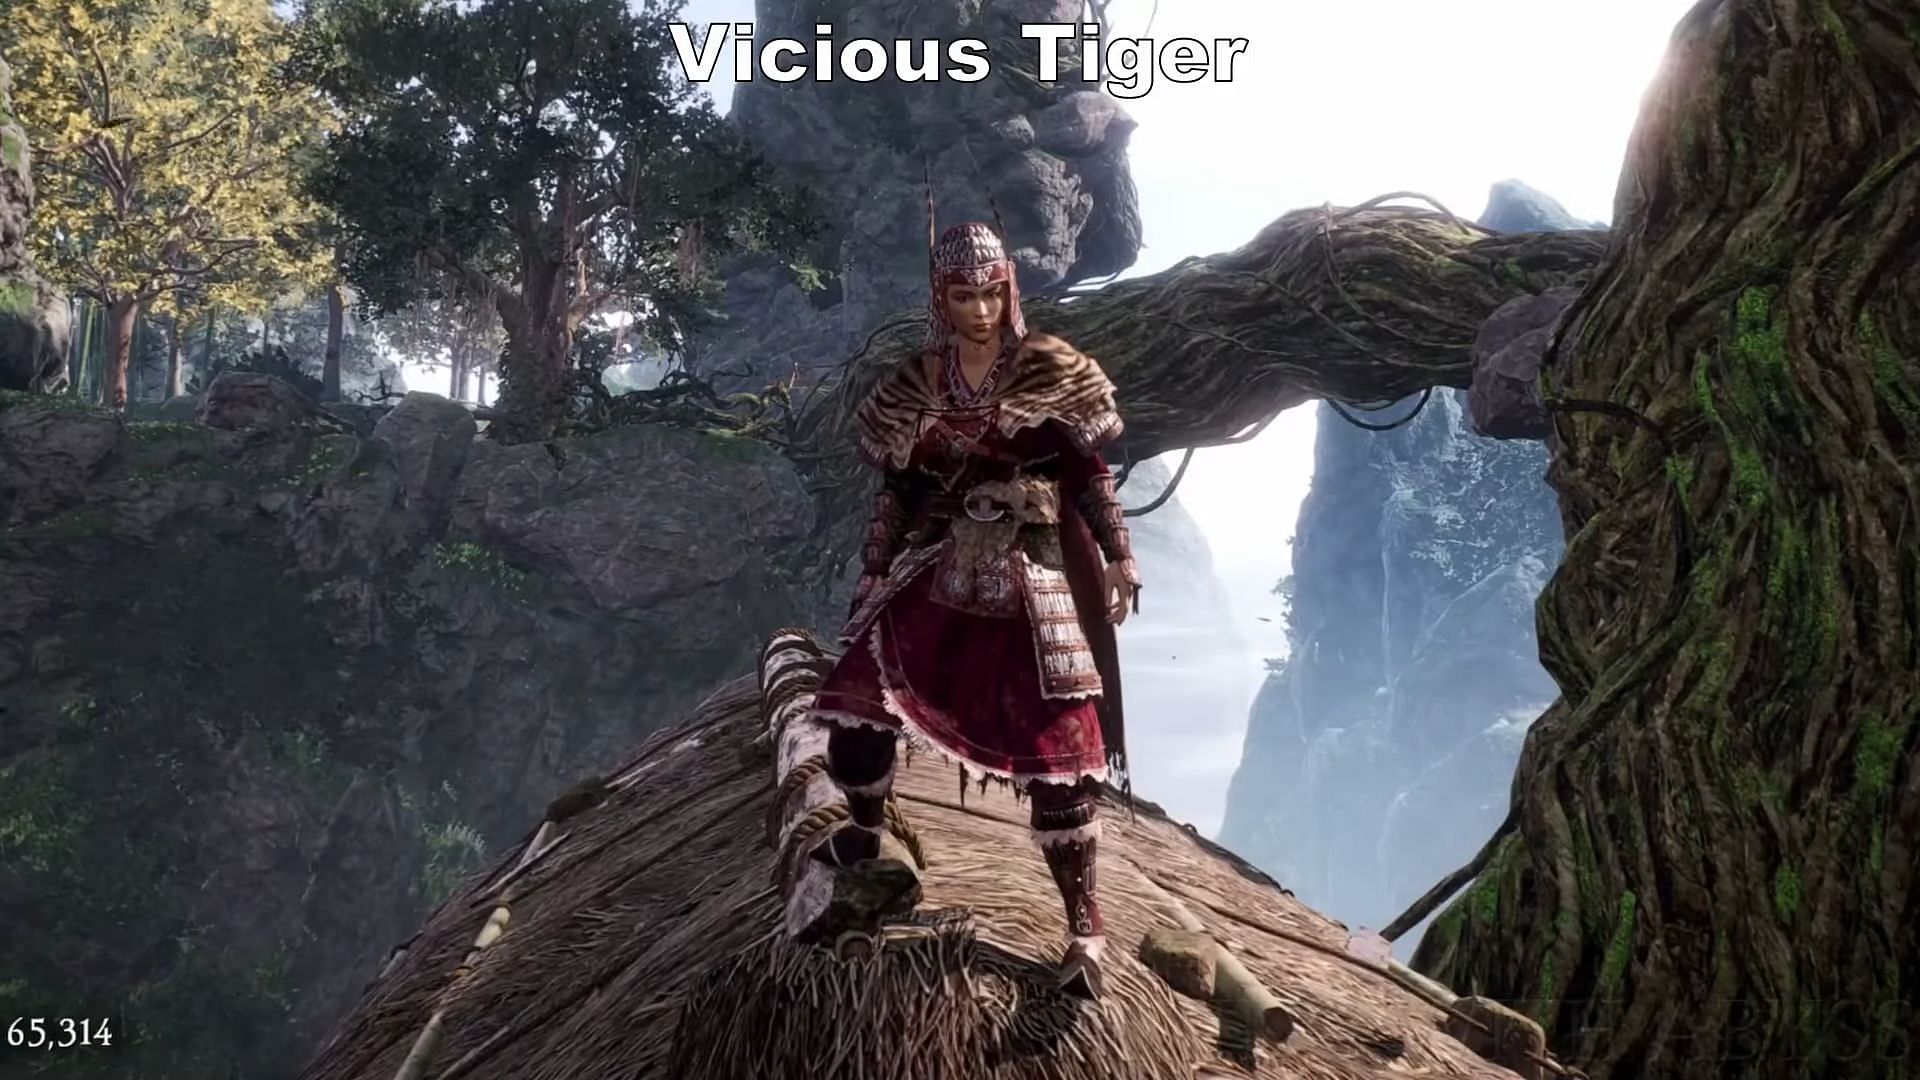 The Vicious Tiger heavy armor set (Image via YouTube Channel Gaming with Abyss)